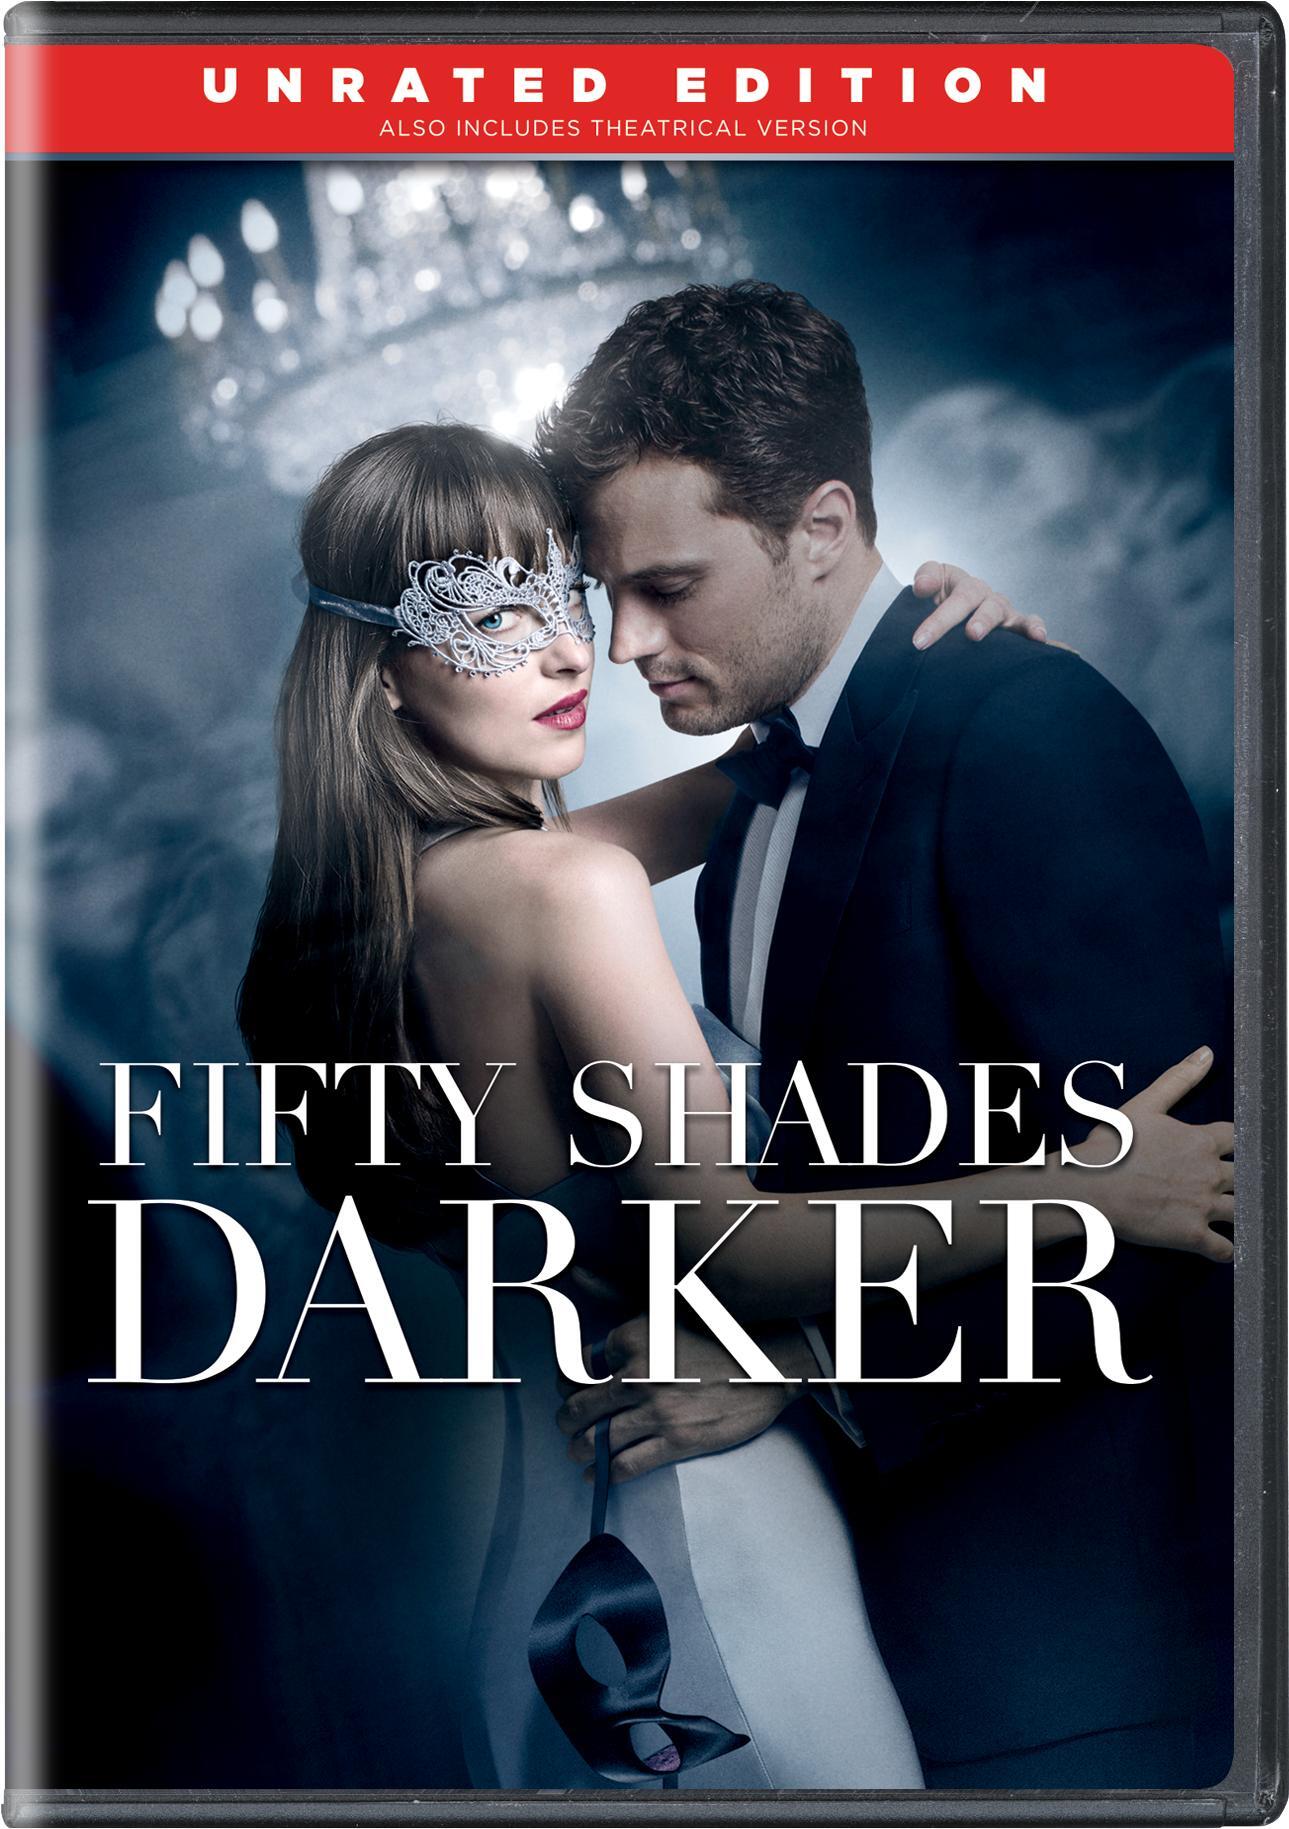 Fifty Shades Darker (Unrated Edition) - DVD [ 2017 ]  - Drama Movies On DVD - Movies On GRUV